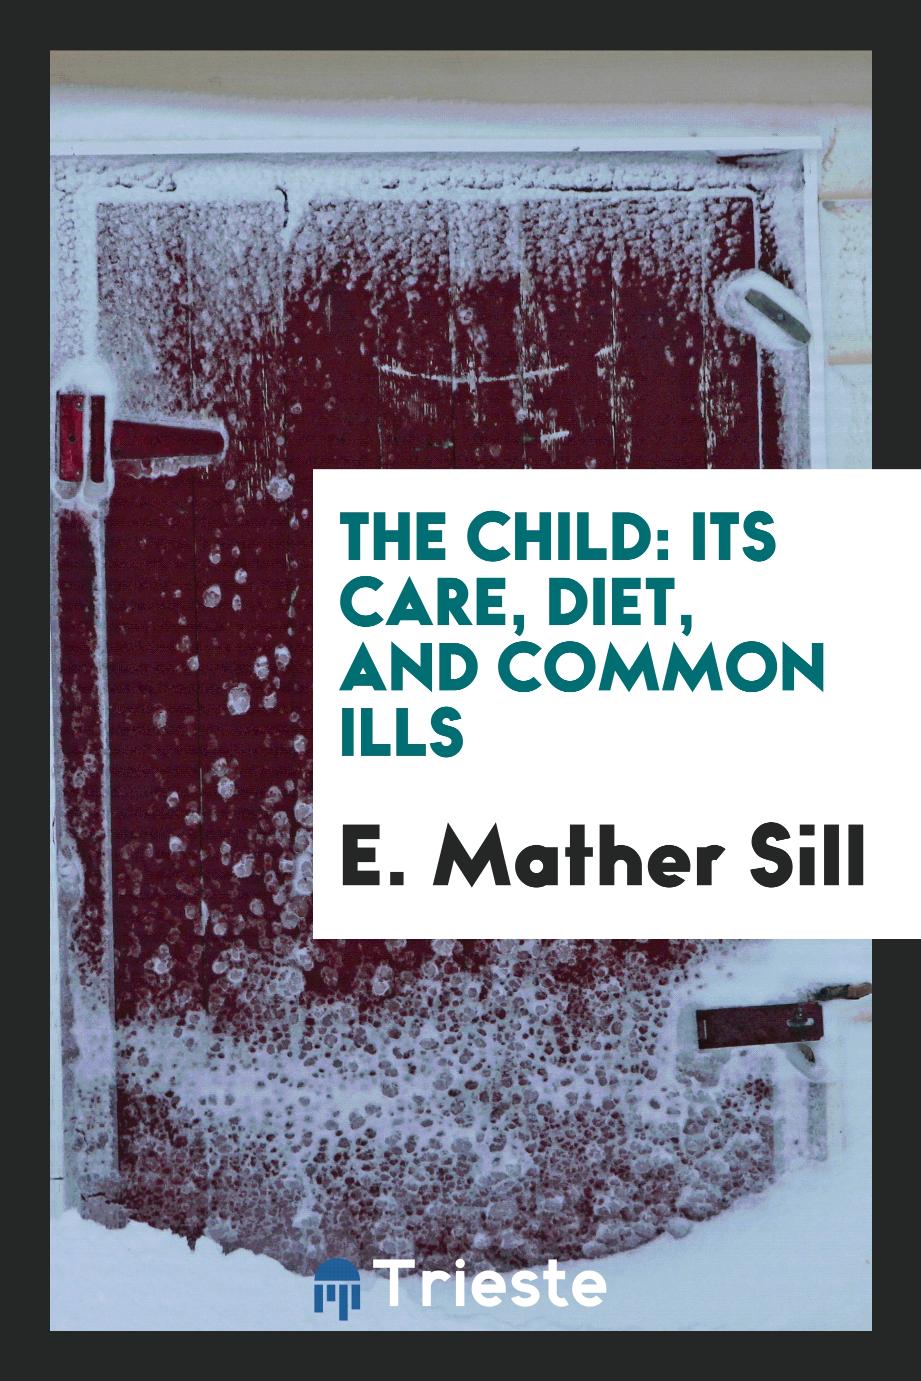 The Child: Its Care, Diet, and Common Ills